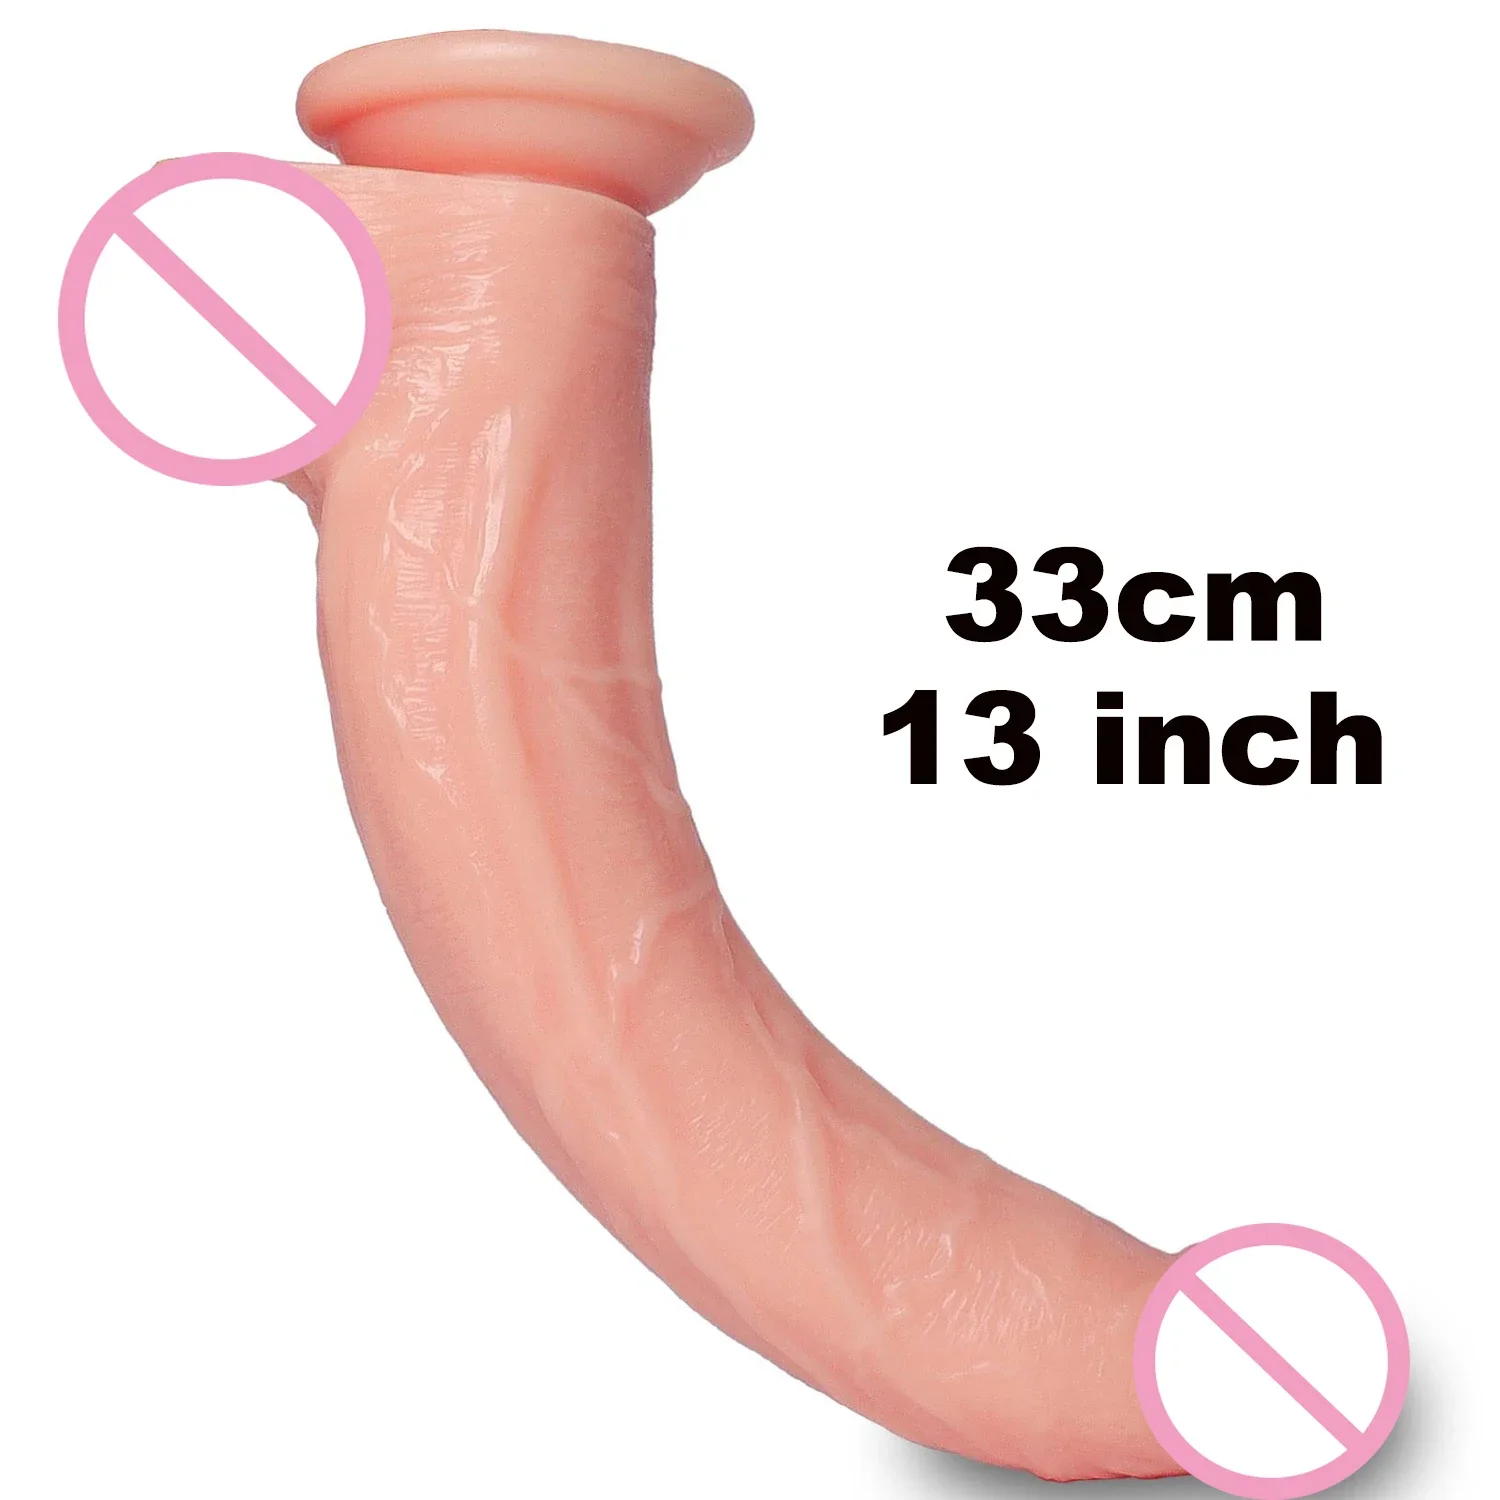 

13Inch Realistic Dildos Small Glans Dildo with Suction Cup Thick Big Anal Penis Sex Toy for Women Massage Masturbation for Woman